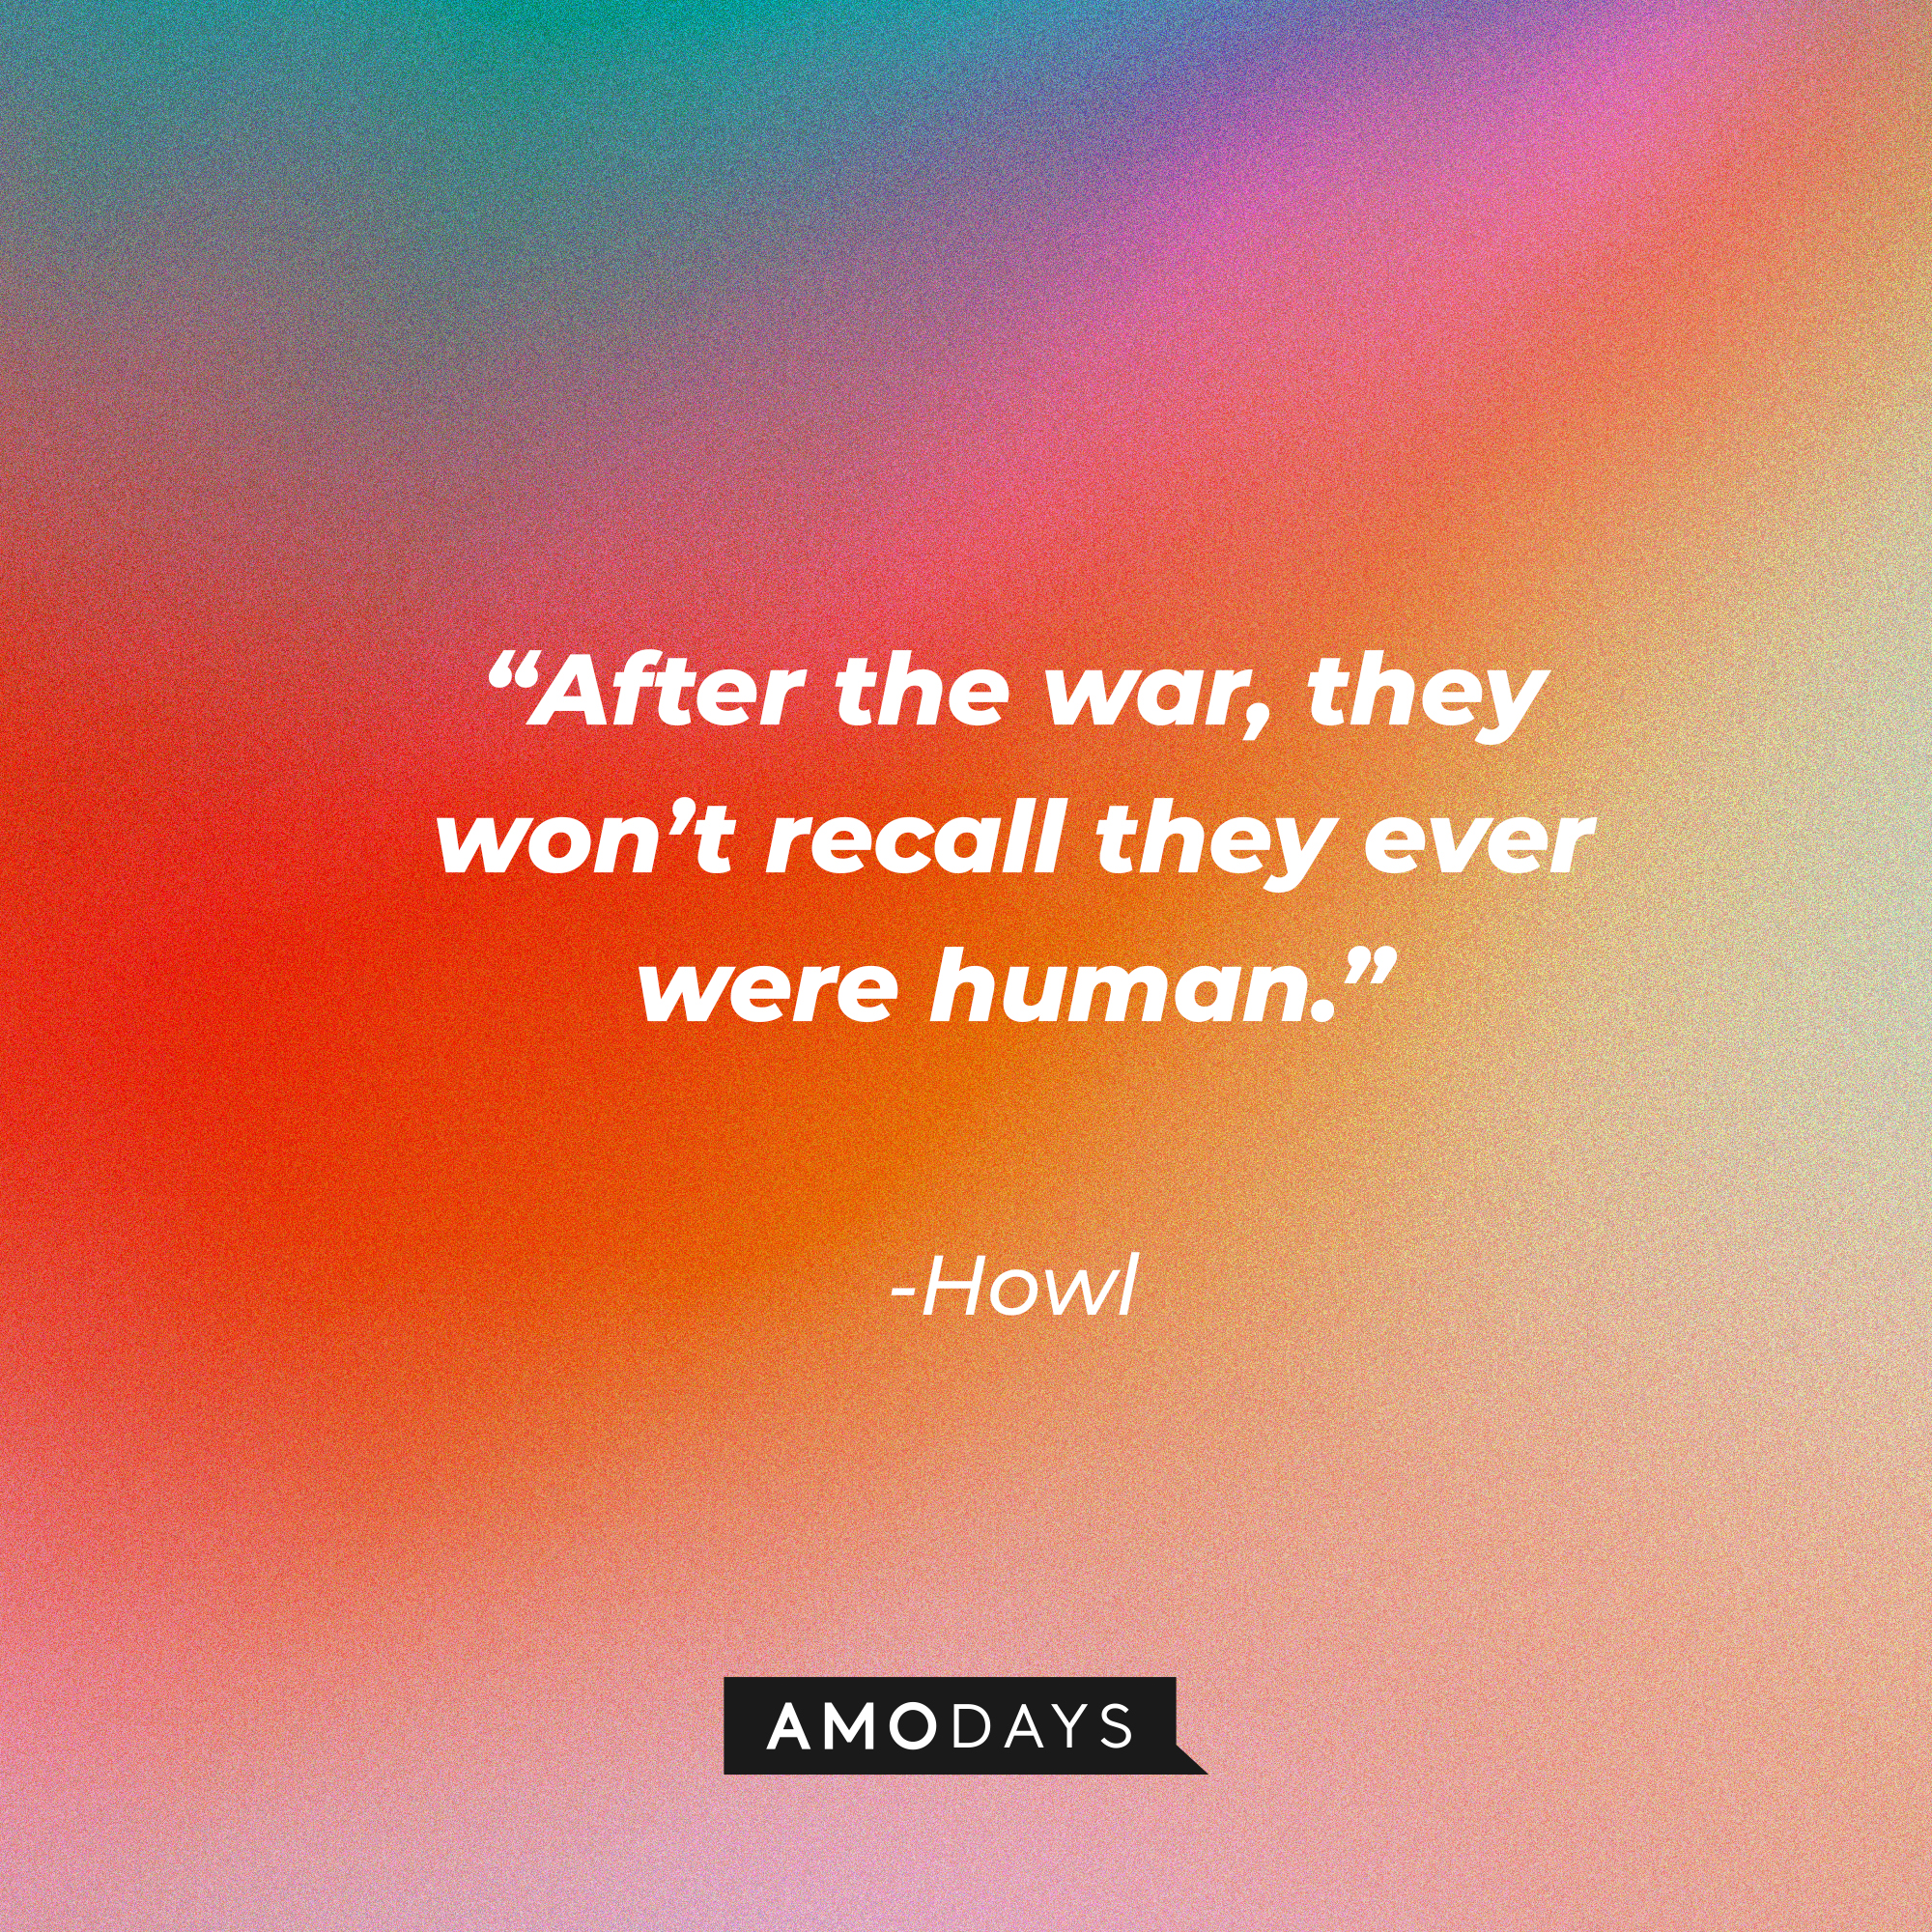 Howl’s quote: “After the war, they won’t recall they ever were human.”  | Source: AmoDays